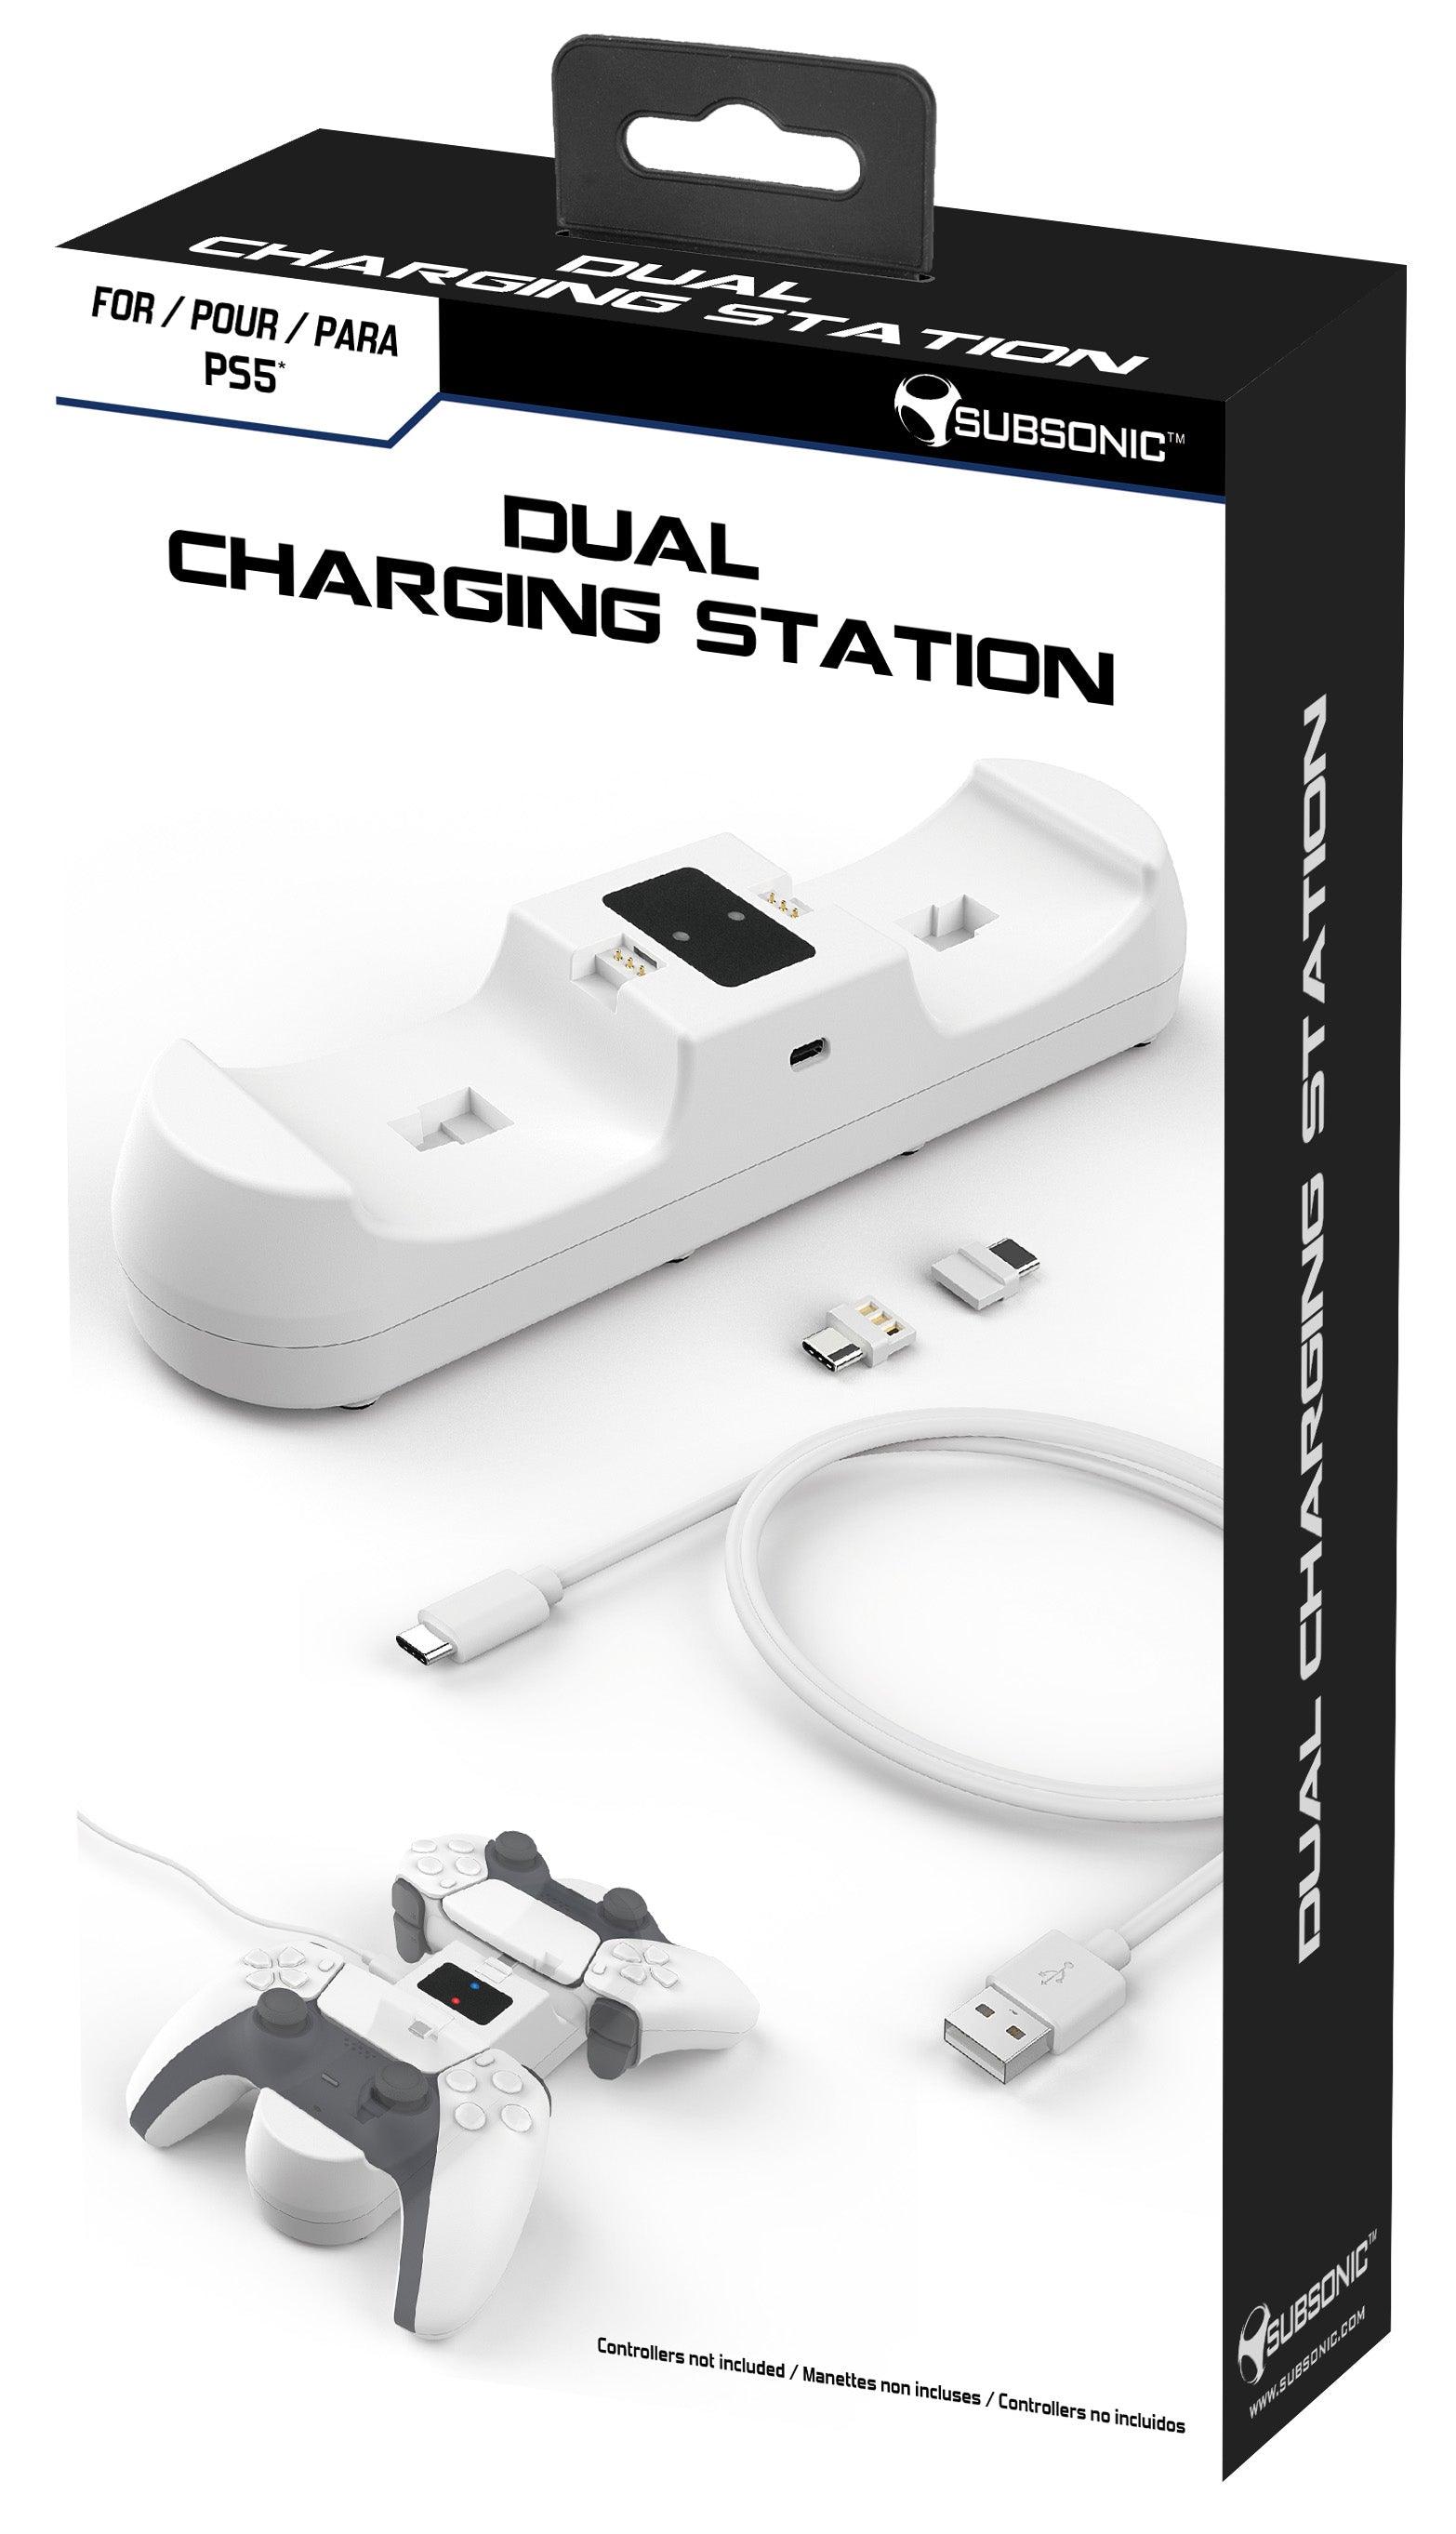 Dual Drop & Charge Station - Want a New Gadget